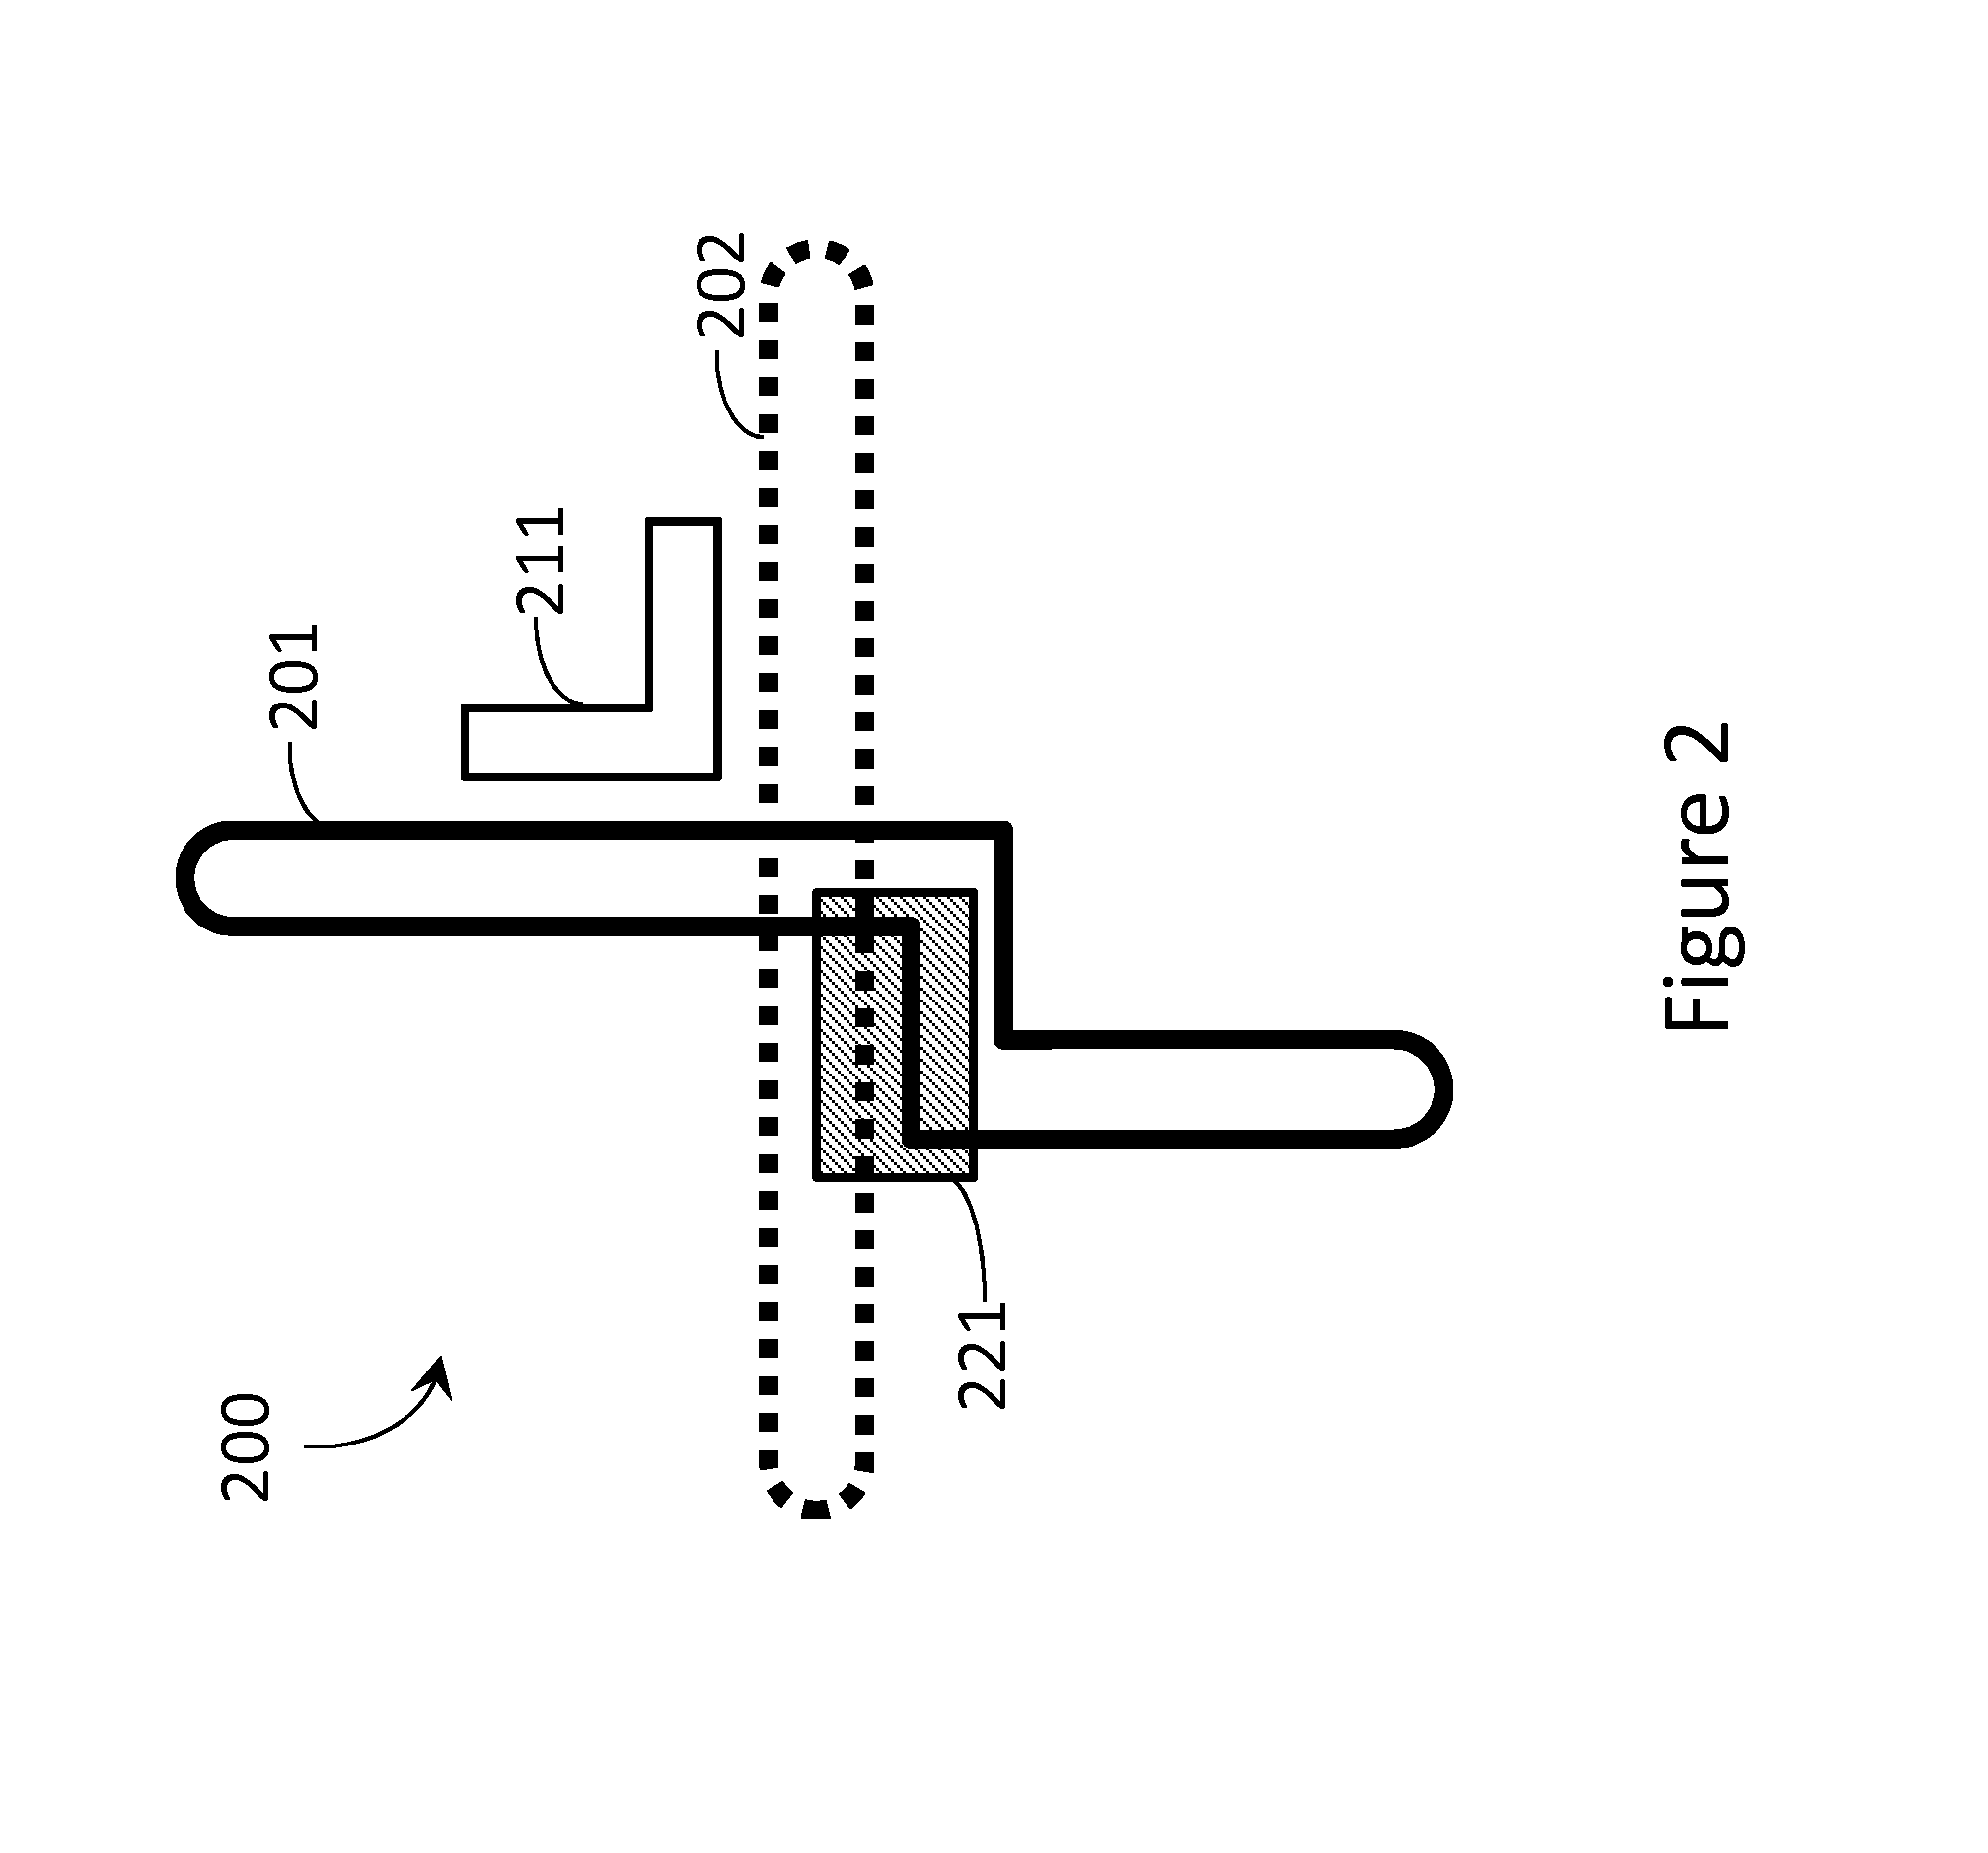 Systems and methods for increasing the energy scale of a quantum processor